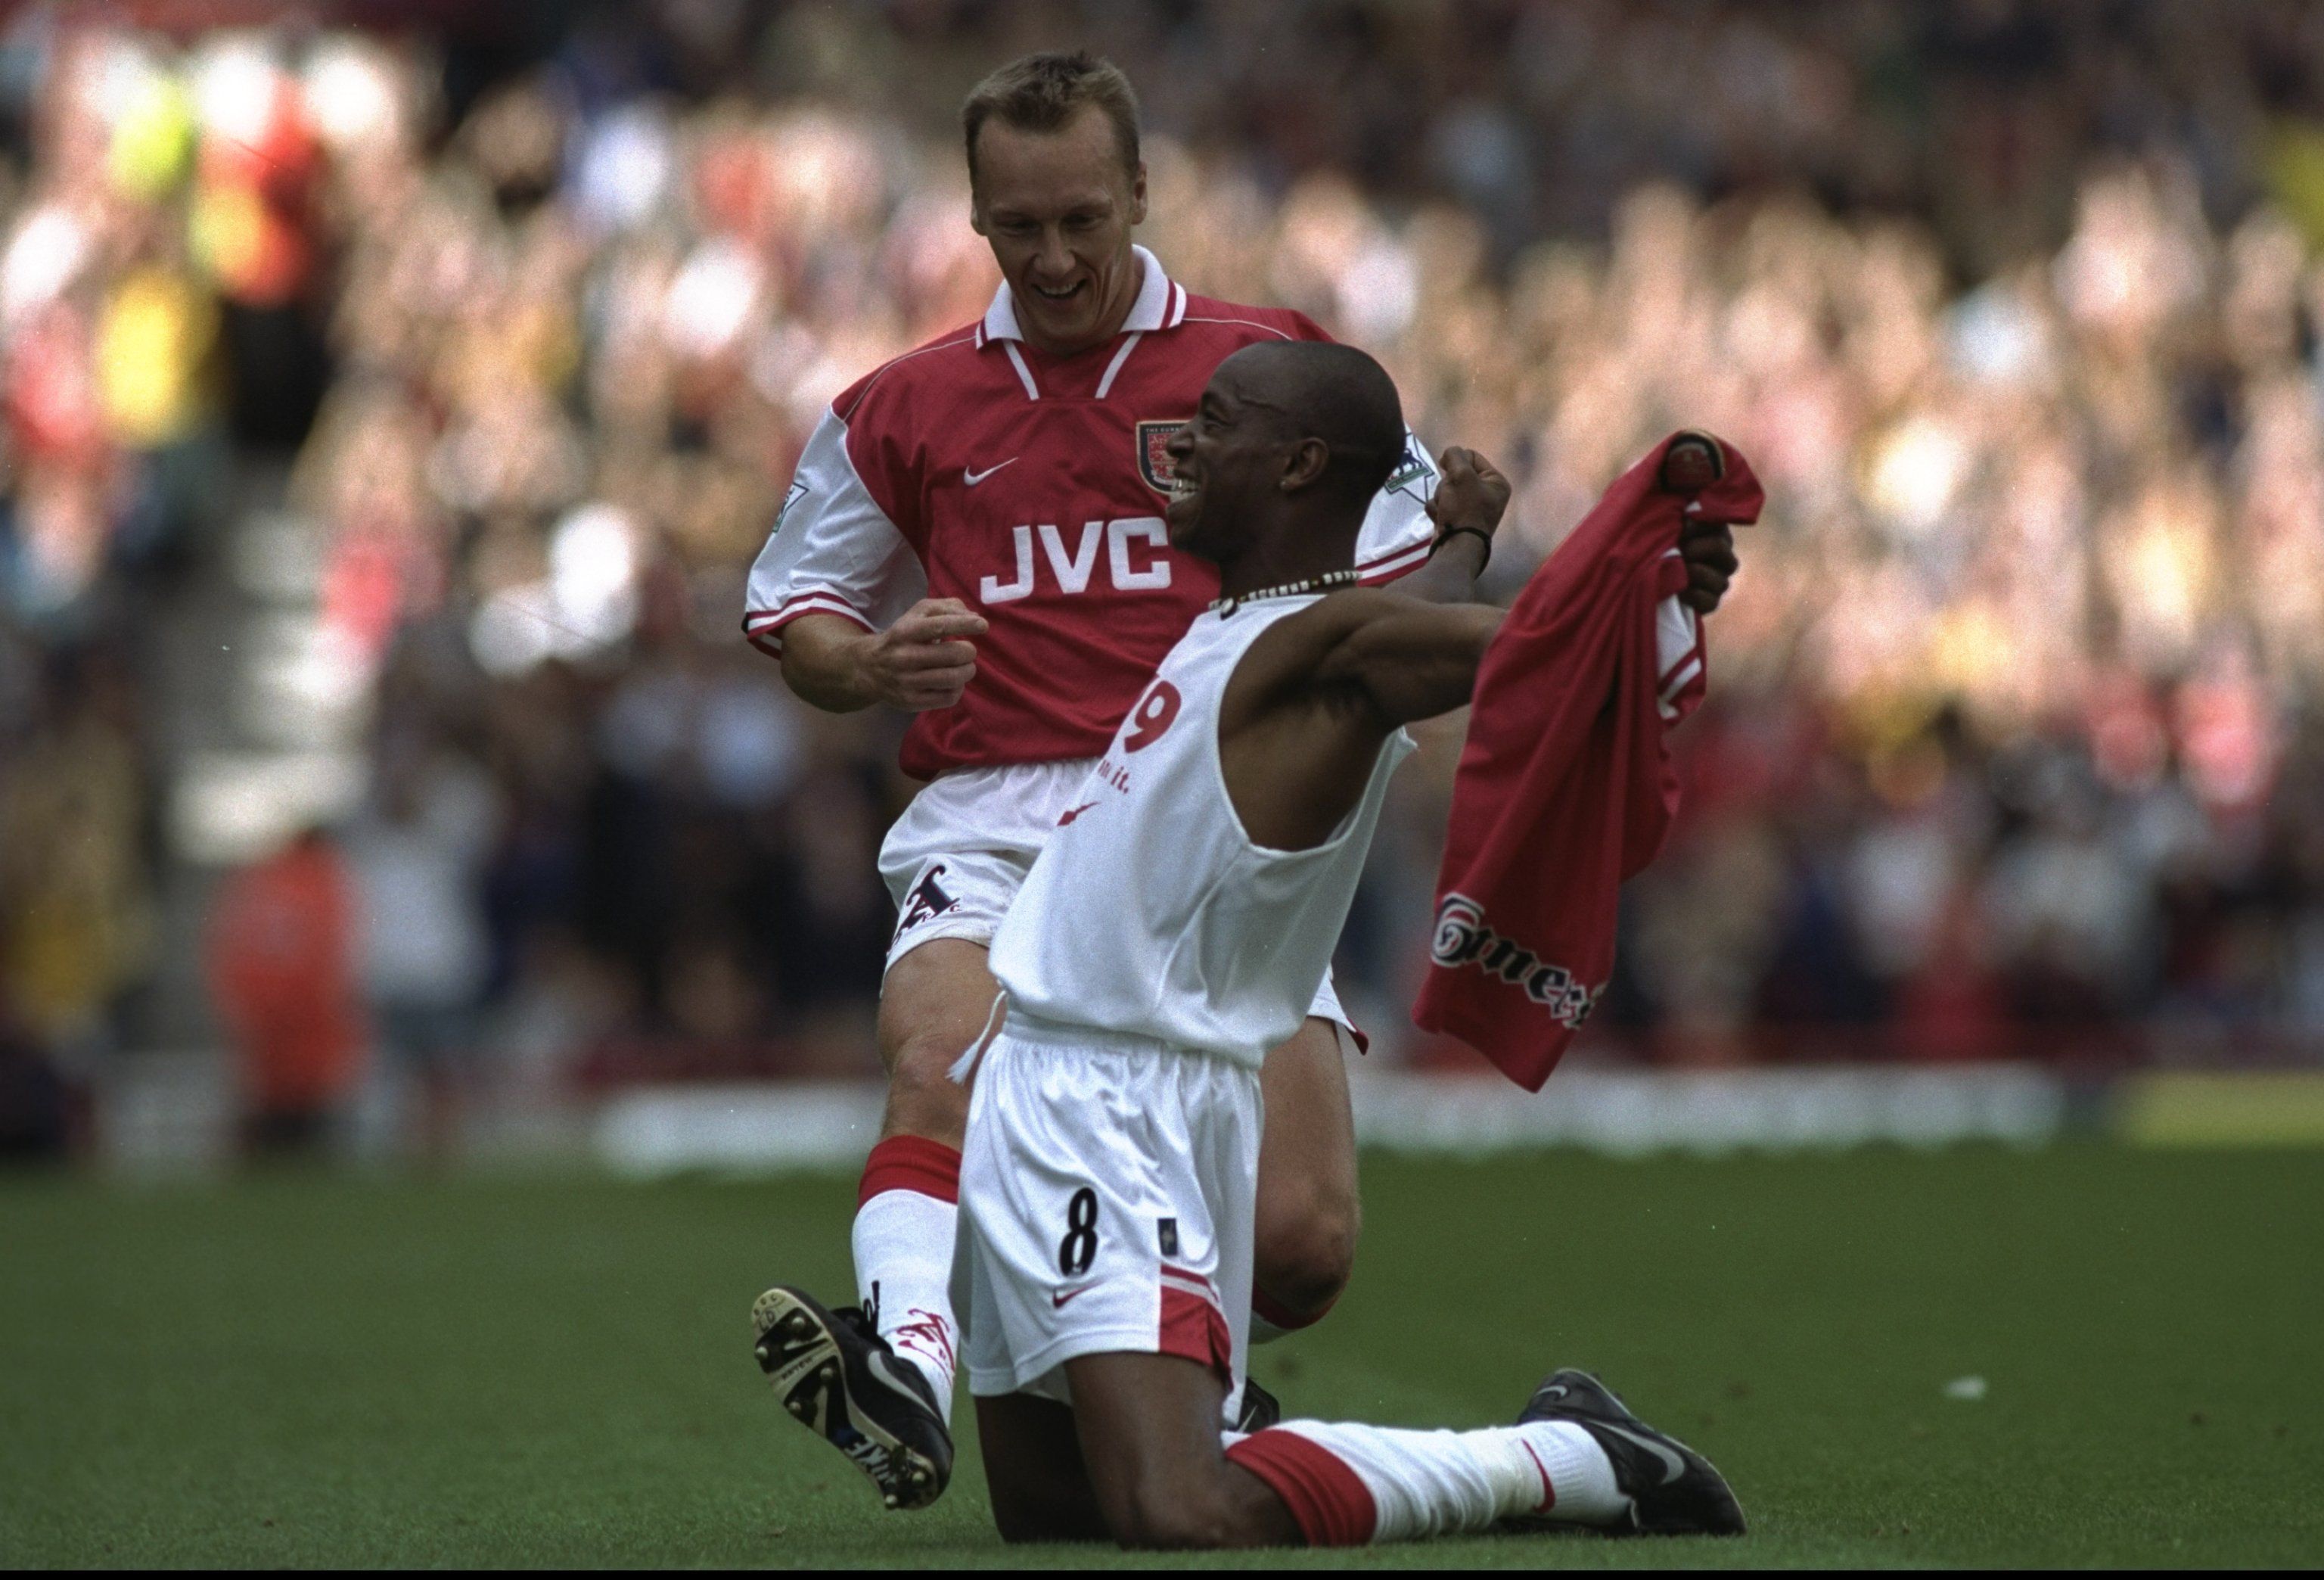 Ian Wright (front) and Lee Dixon (rear) of Arsenal celebrate